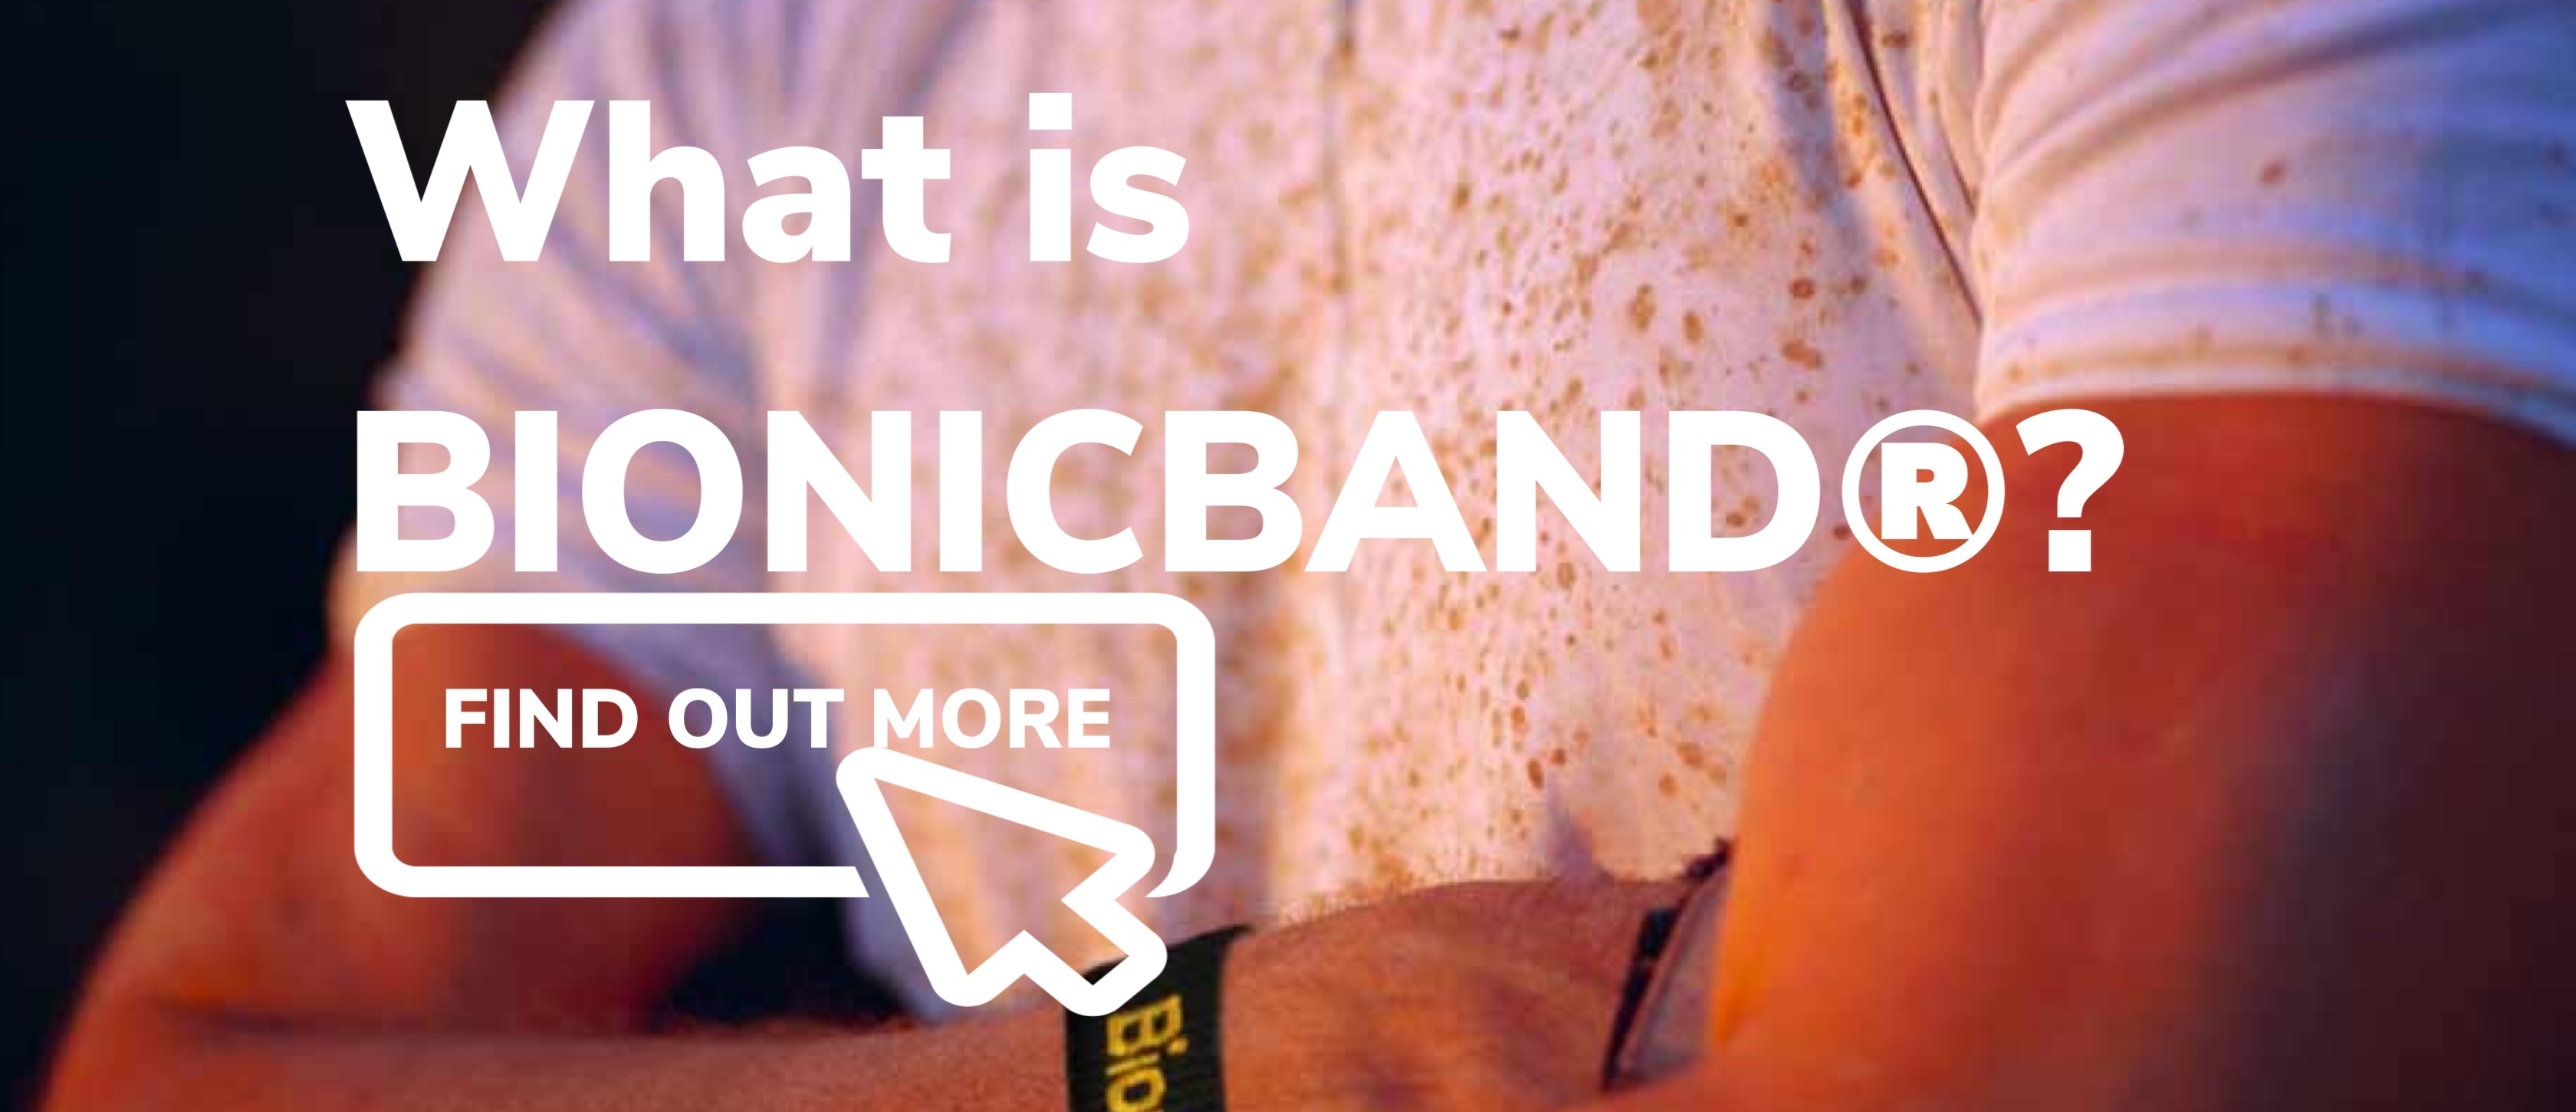 What is BIONICBAND®?